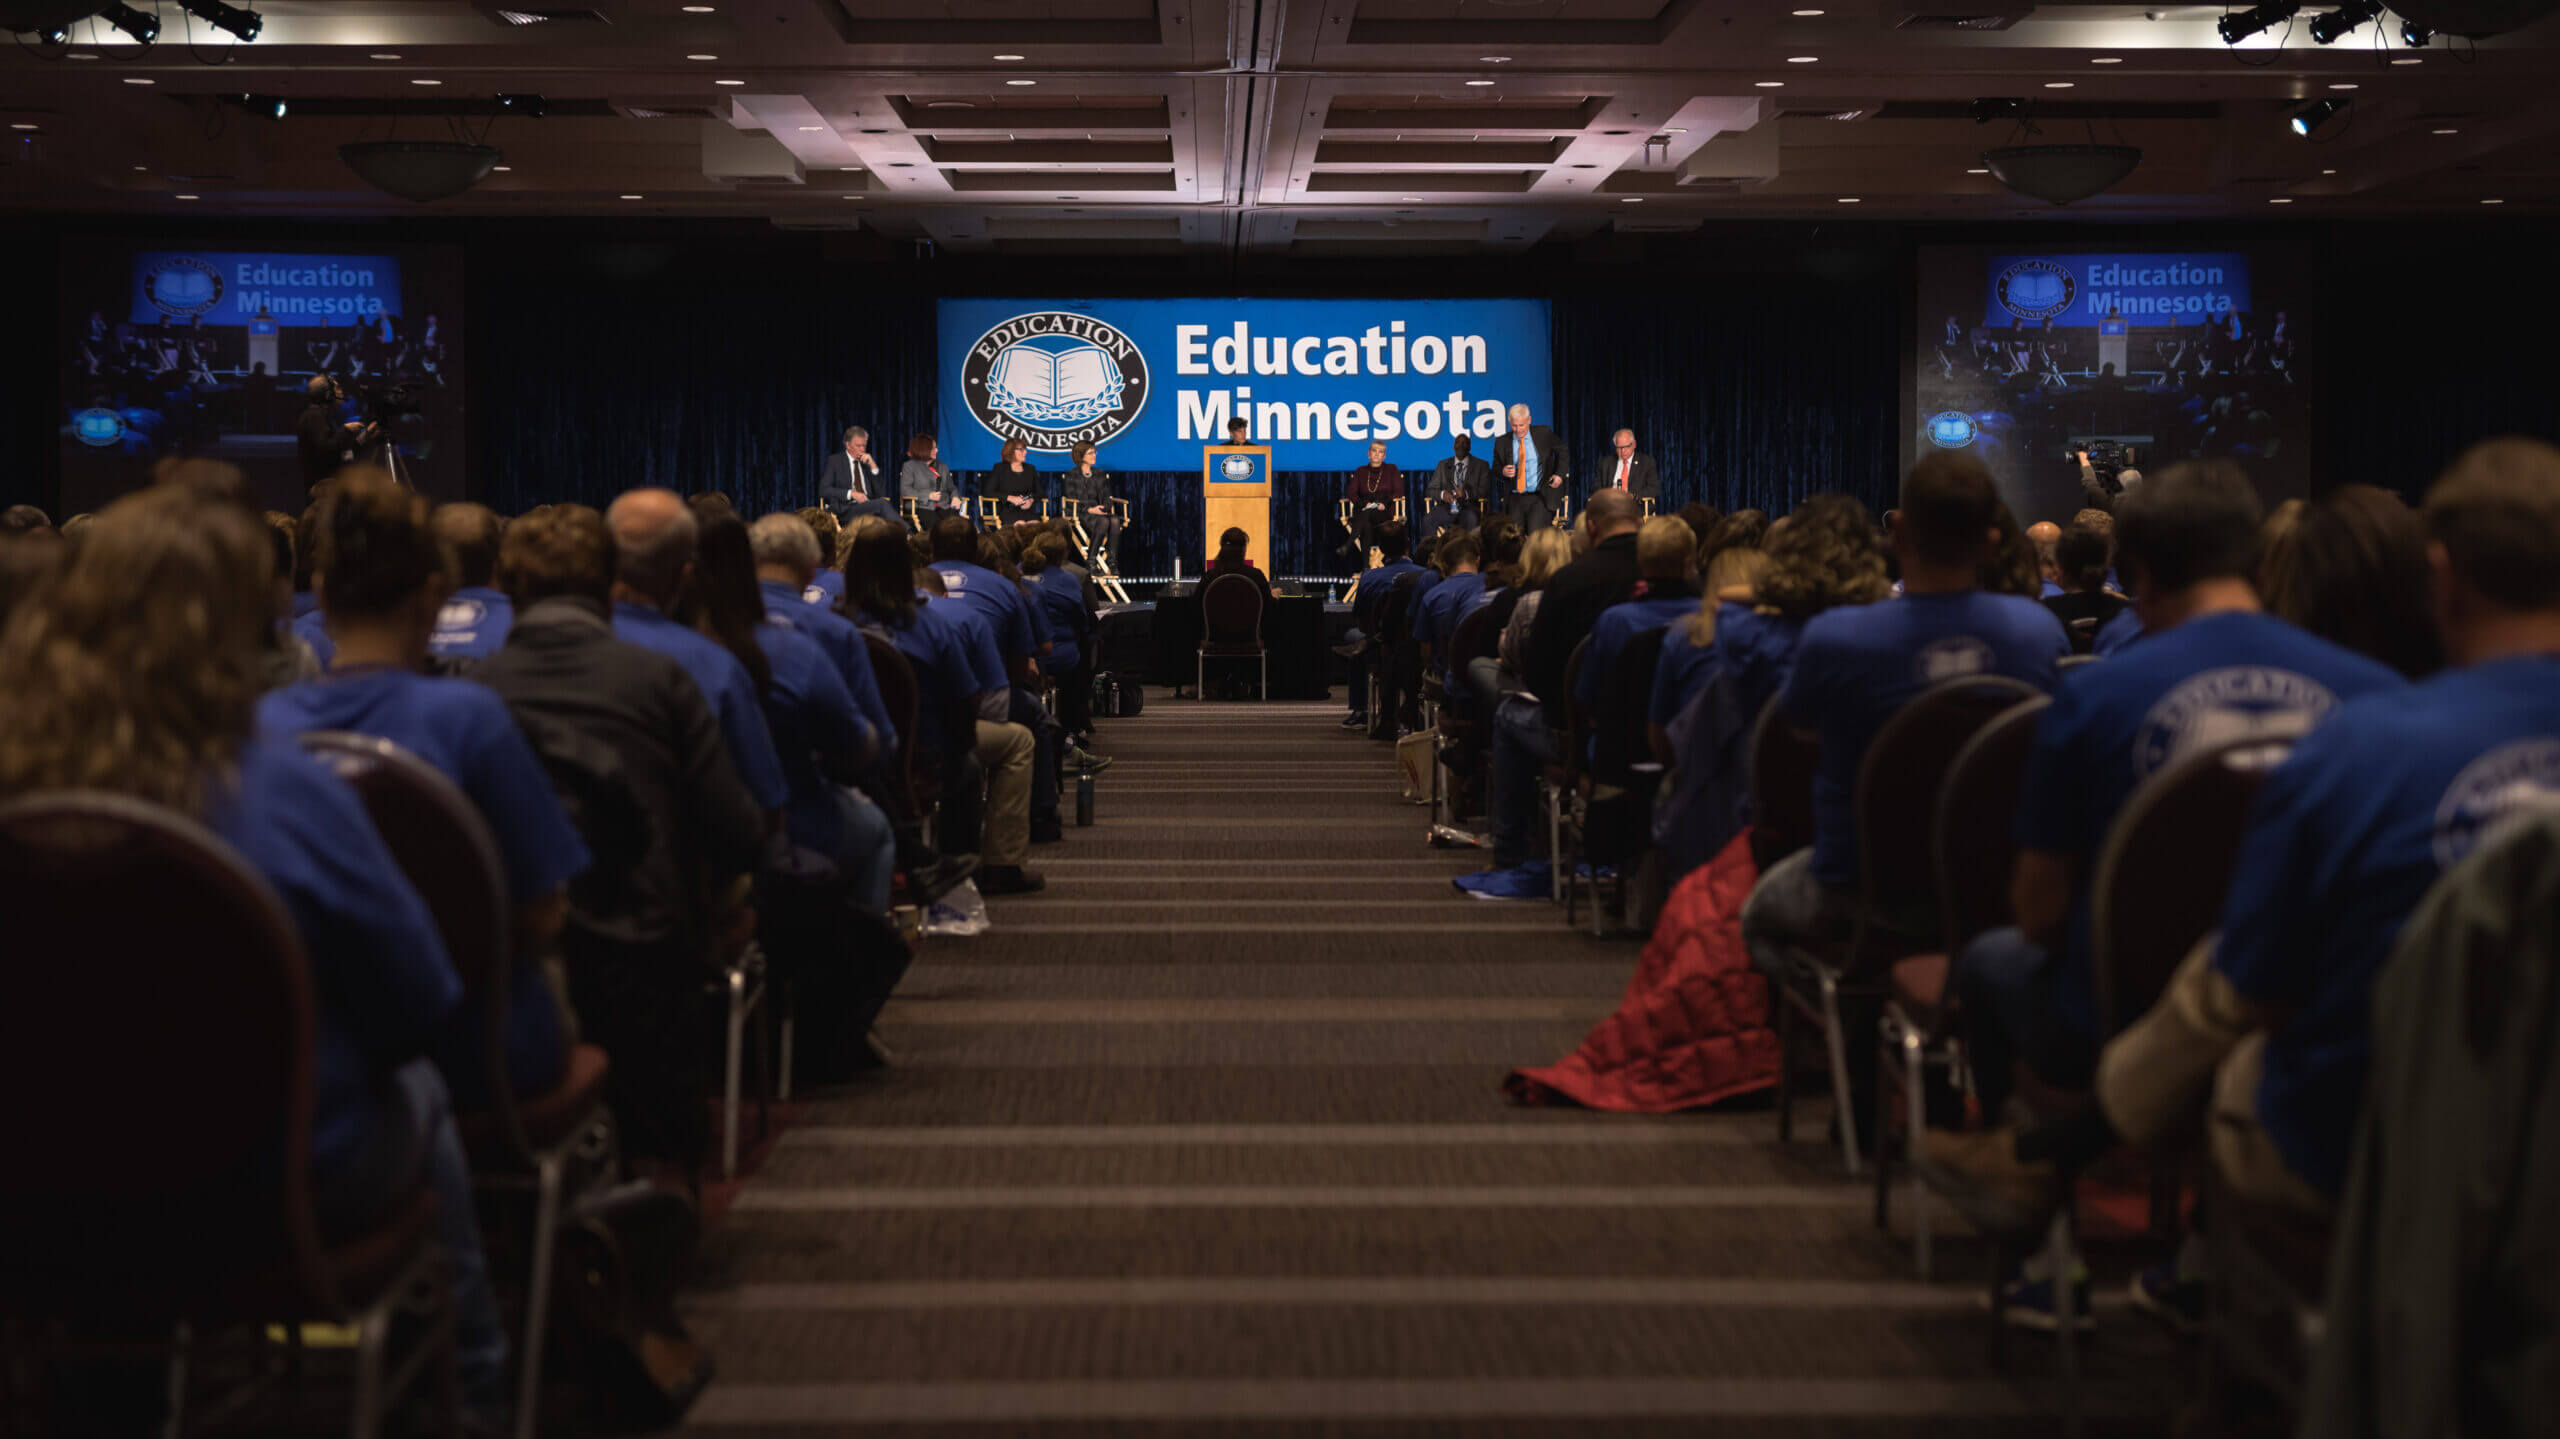 The 2017 Political Conference featured a gubernatorial candidate forum, which kicked of Education Minnesota’s most inclusive and transparent endorsement process in history. That process will take place again this year, with a virtual forum taking place in January. Details will be shared on Education Minnesota’s website and social media channels.